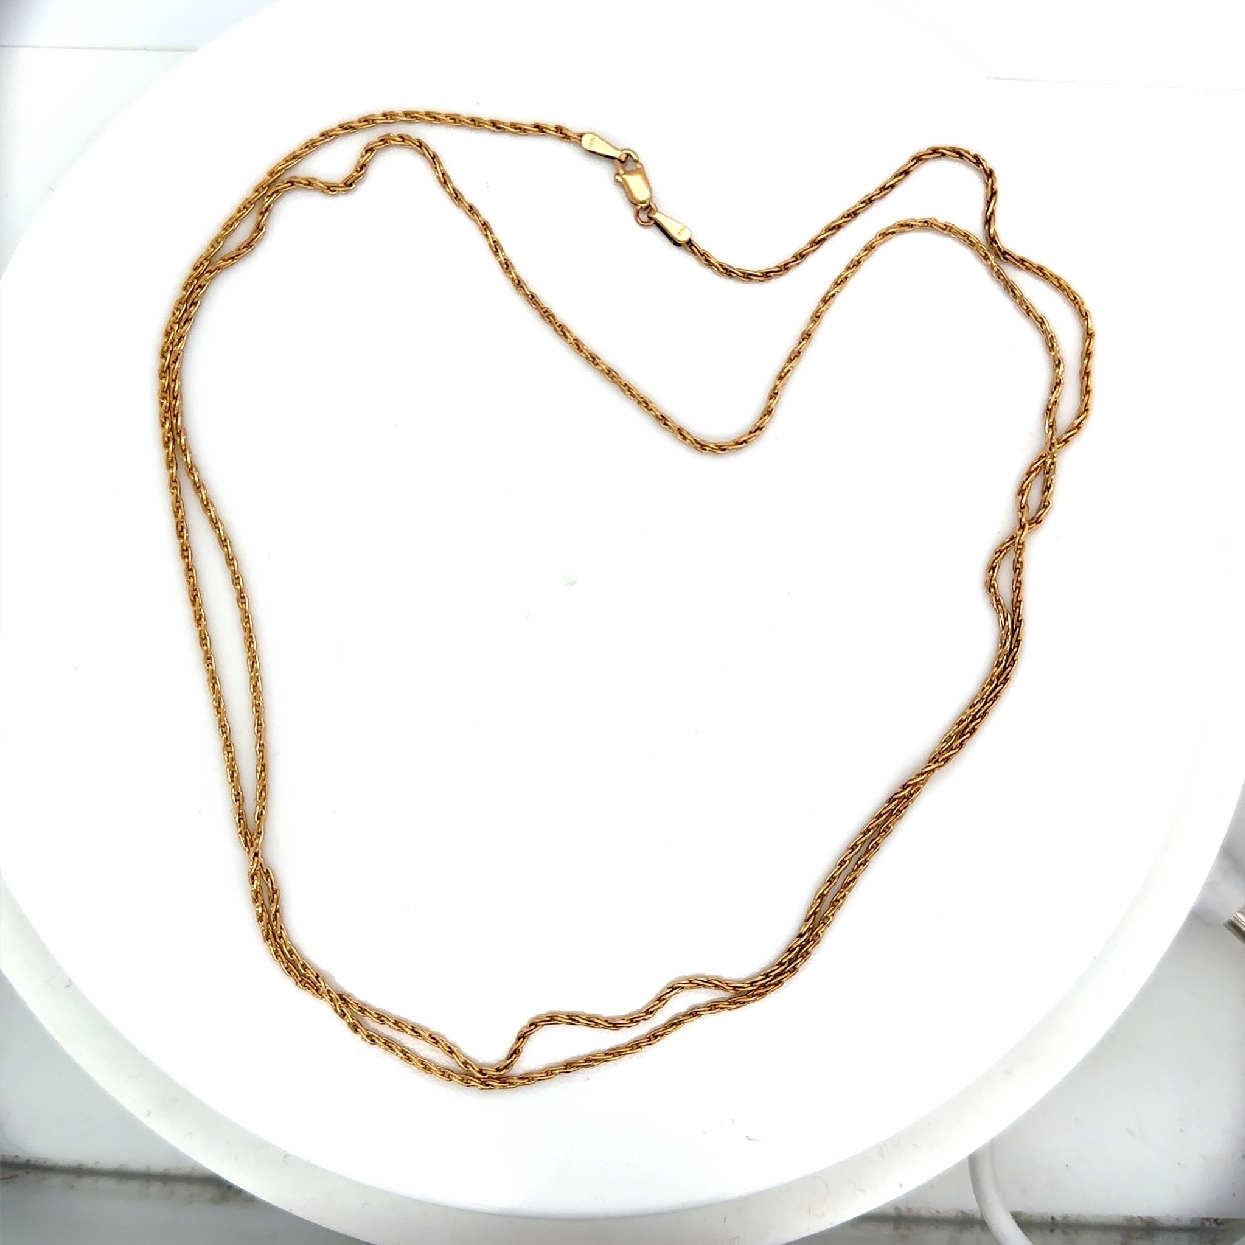 14K Yellow Gold Chain

30 Inches 